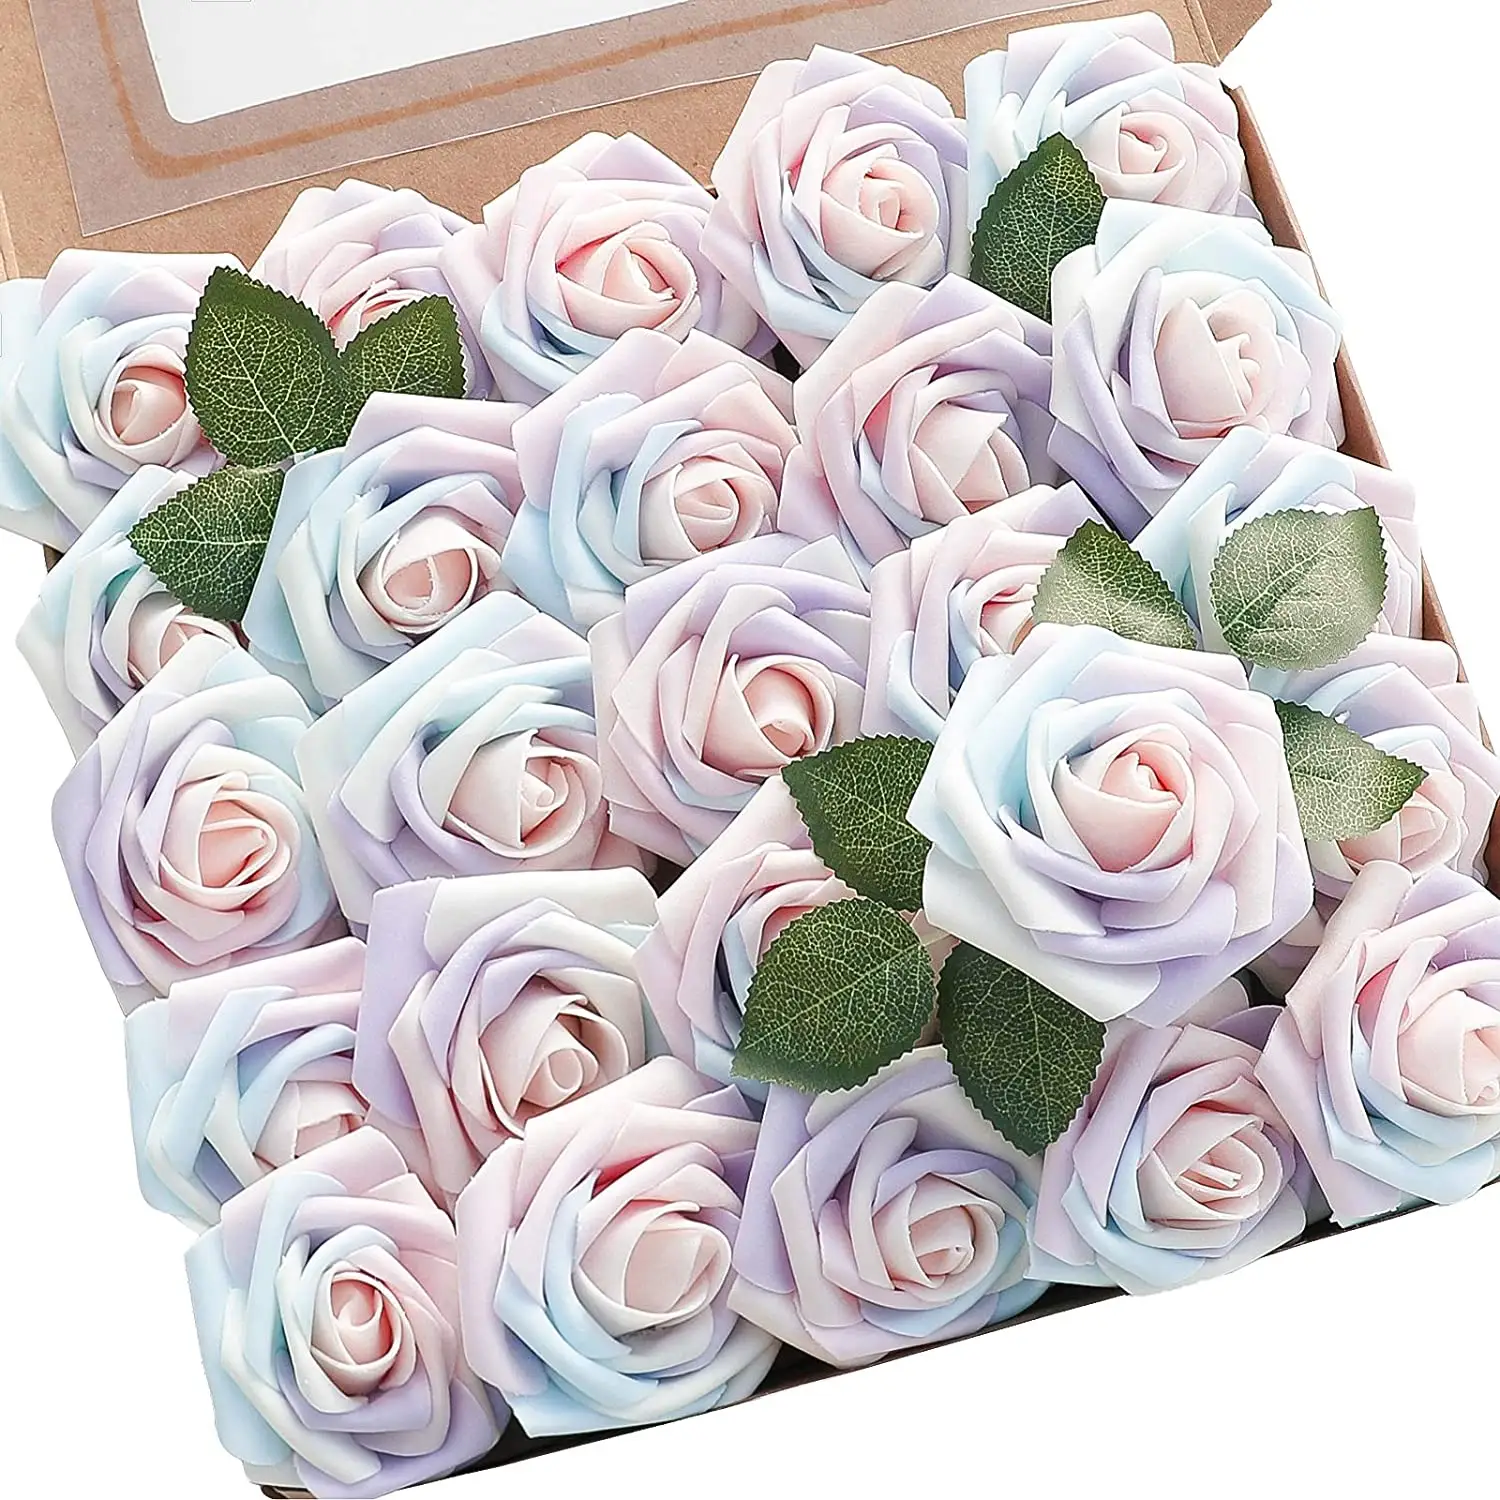 Floroom Artificial Flowers 25pcs Real Looking Blush Foam Faux Roses with Stems DIY Wedding Bouquets Bridal Shower Centerpieces